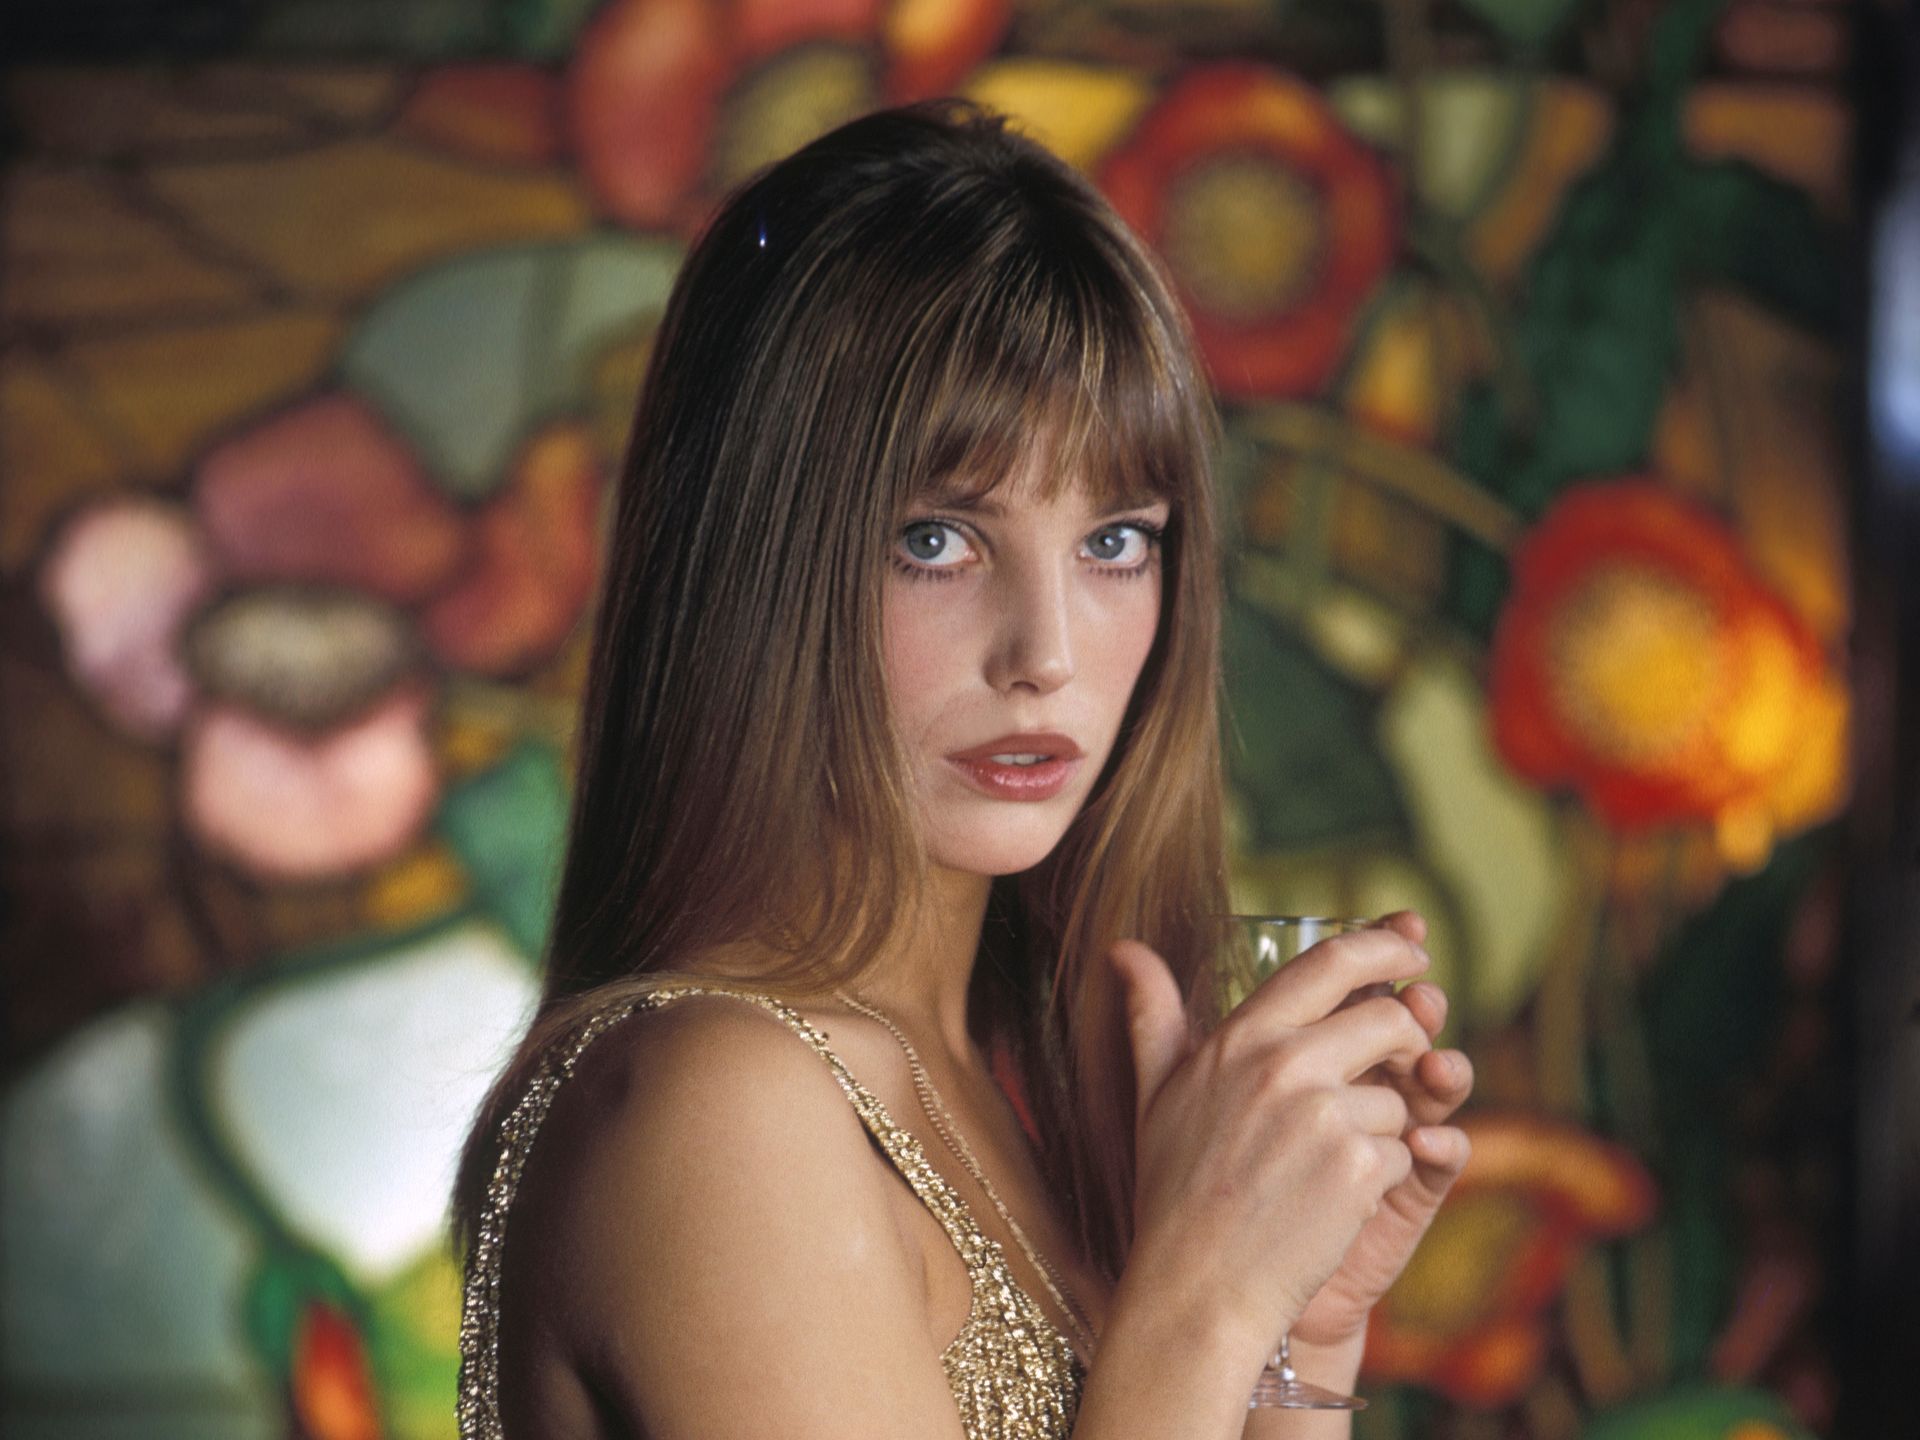 Remembering Jane Birkin, an icon of French girl chic